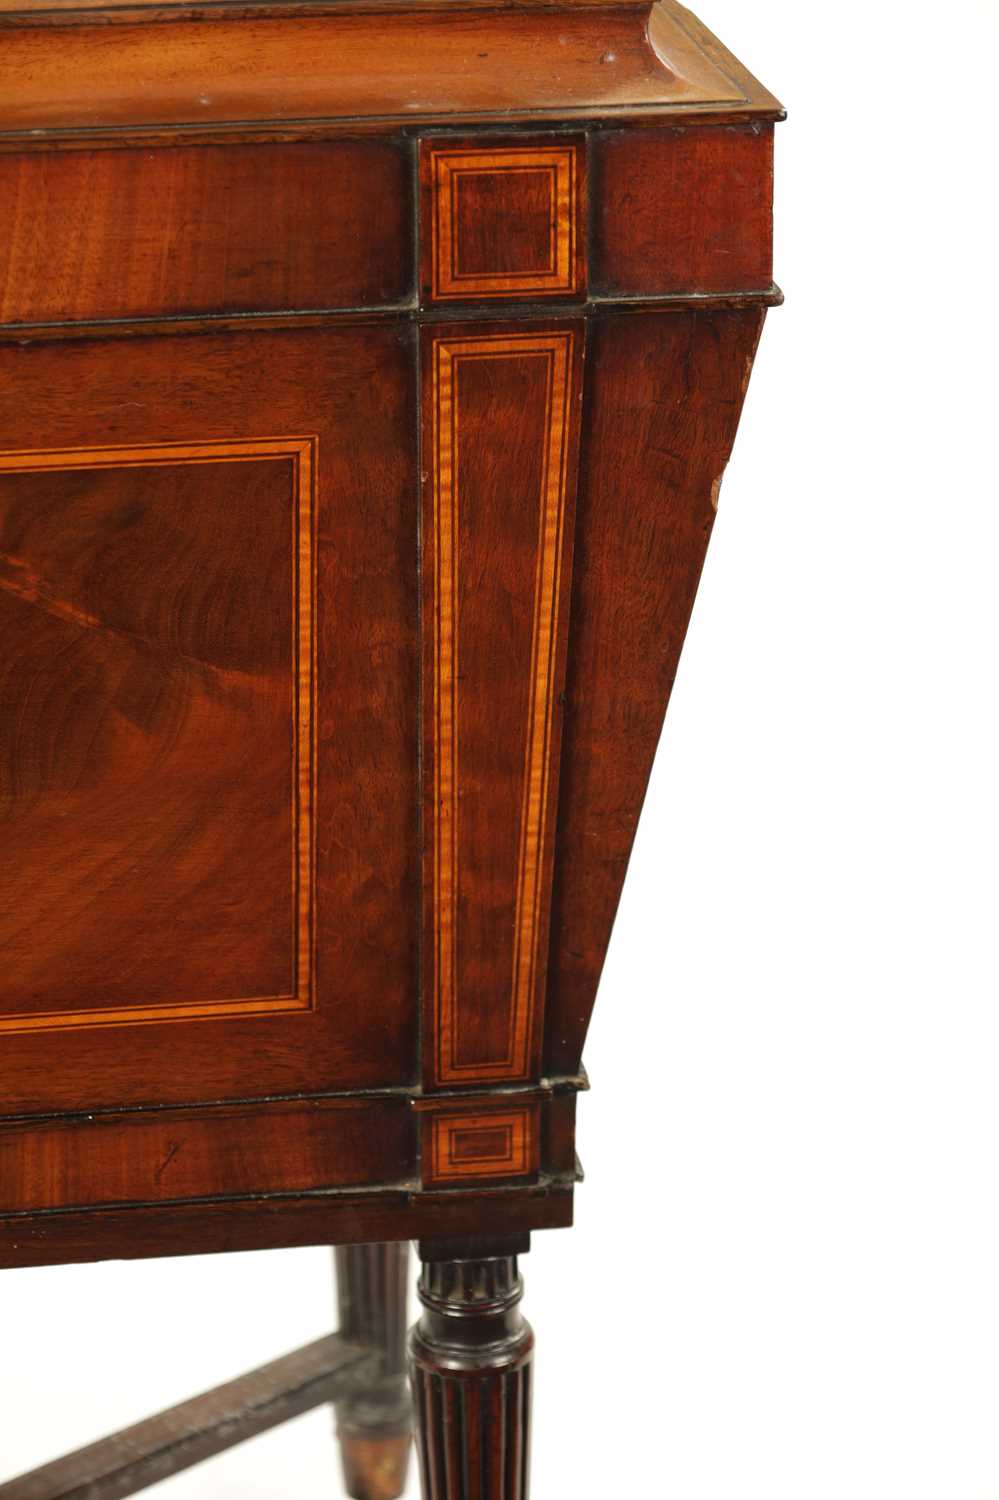 A REGENCY INLAID MAHOGANY CELLARETTE ON TAPERED FLUTED LEGS IN THE MANNER OF GILLOWS - Image 4 of 12